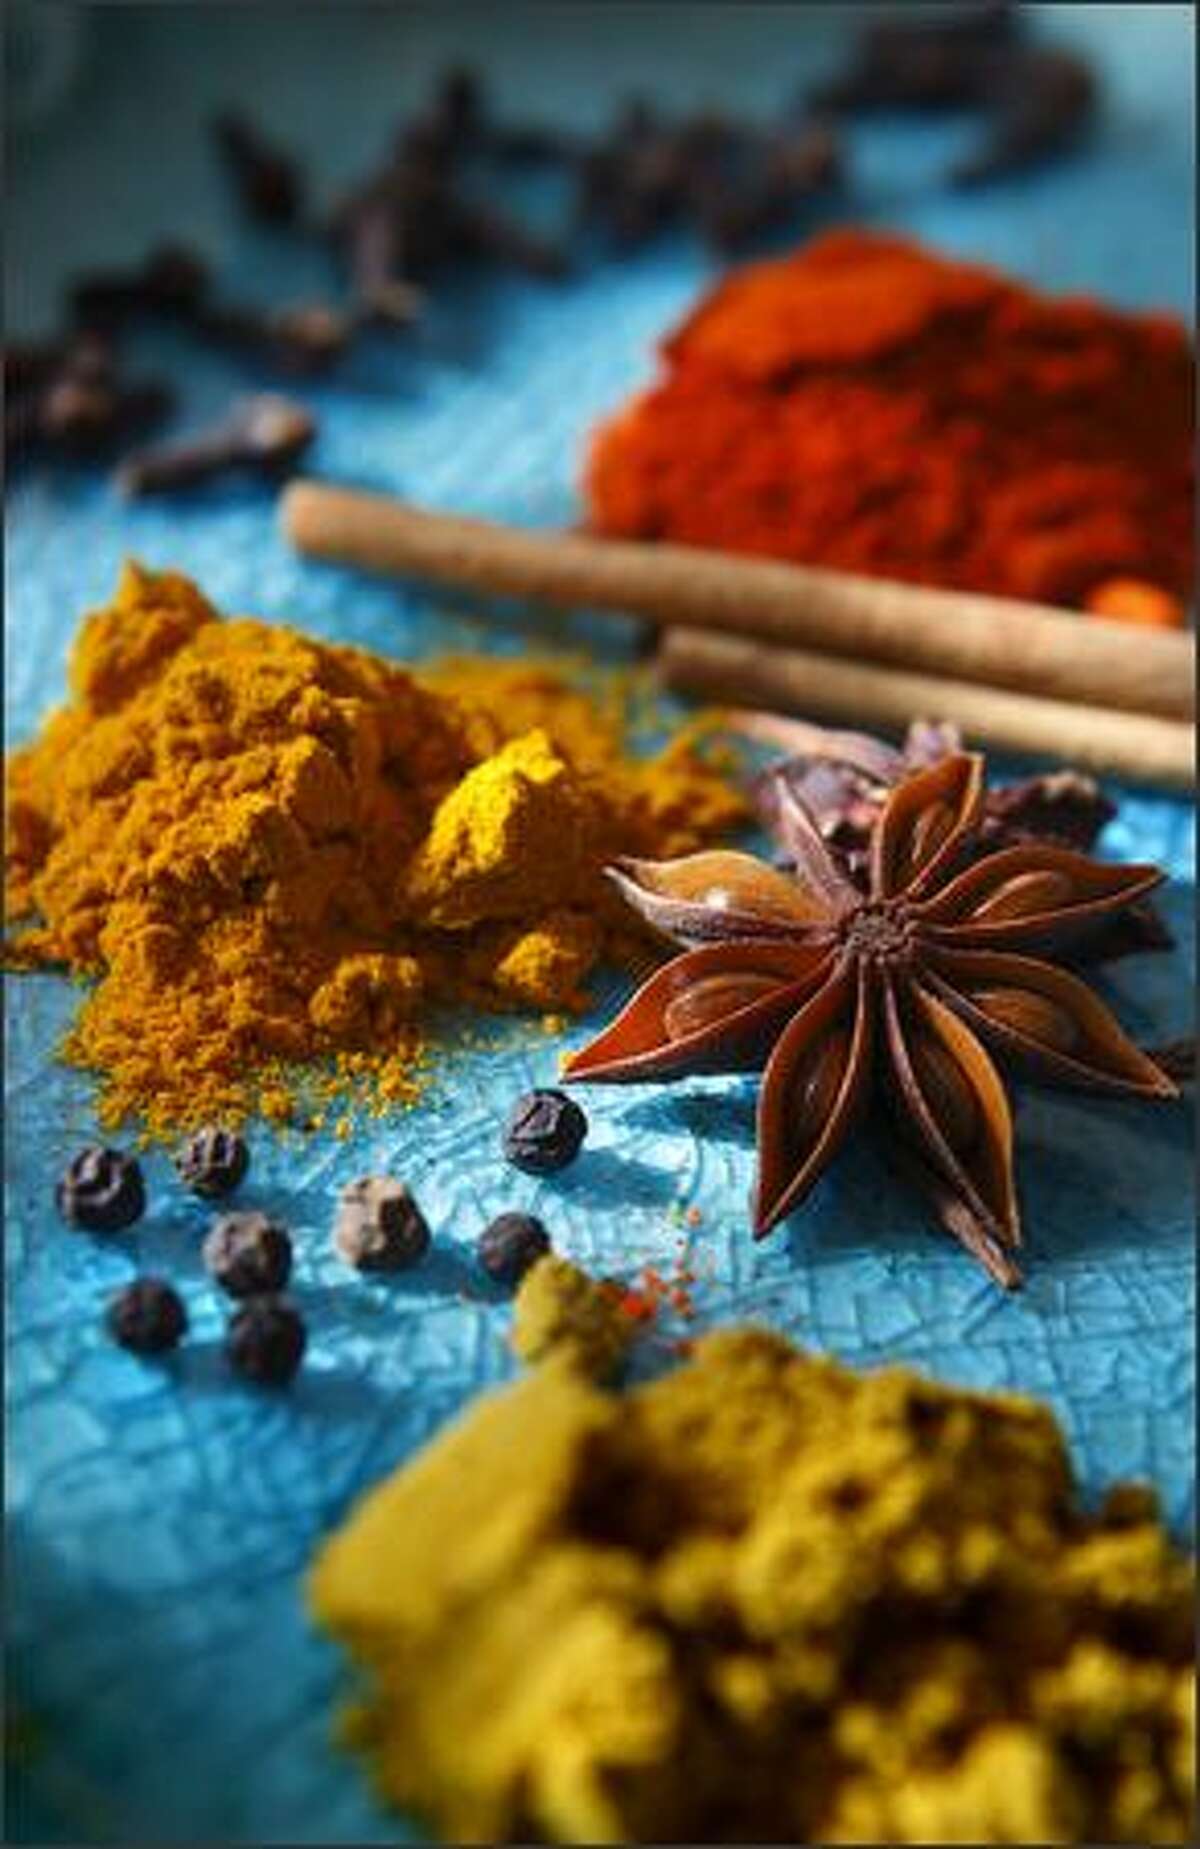 A display of spices created by Christina Arokiasamy includes, clockwise from bottom, garam masala, black pepper corns, cumin powder, cloves, turmeric, cinnamon and star anise.Rogers: This is just a celebration of texture, color and light that was kindly given to me by the chef.